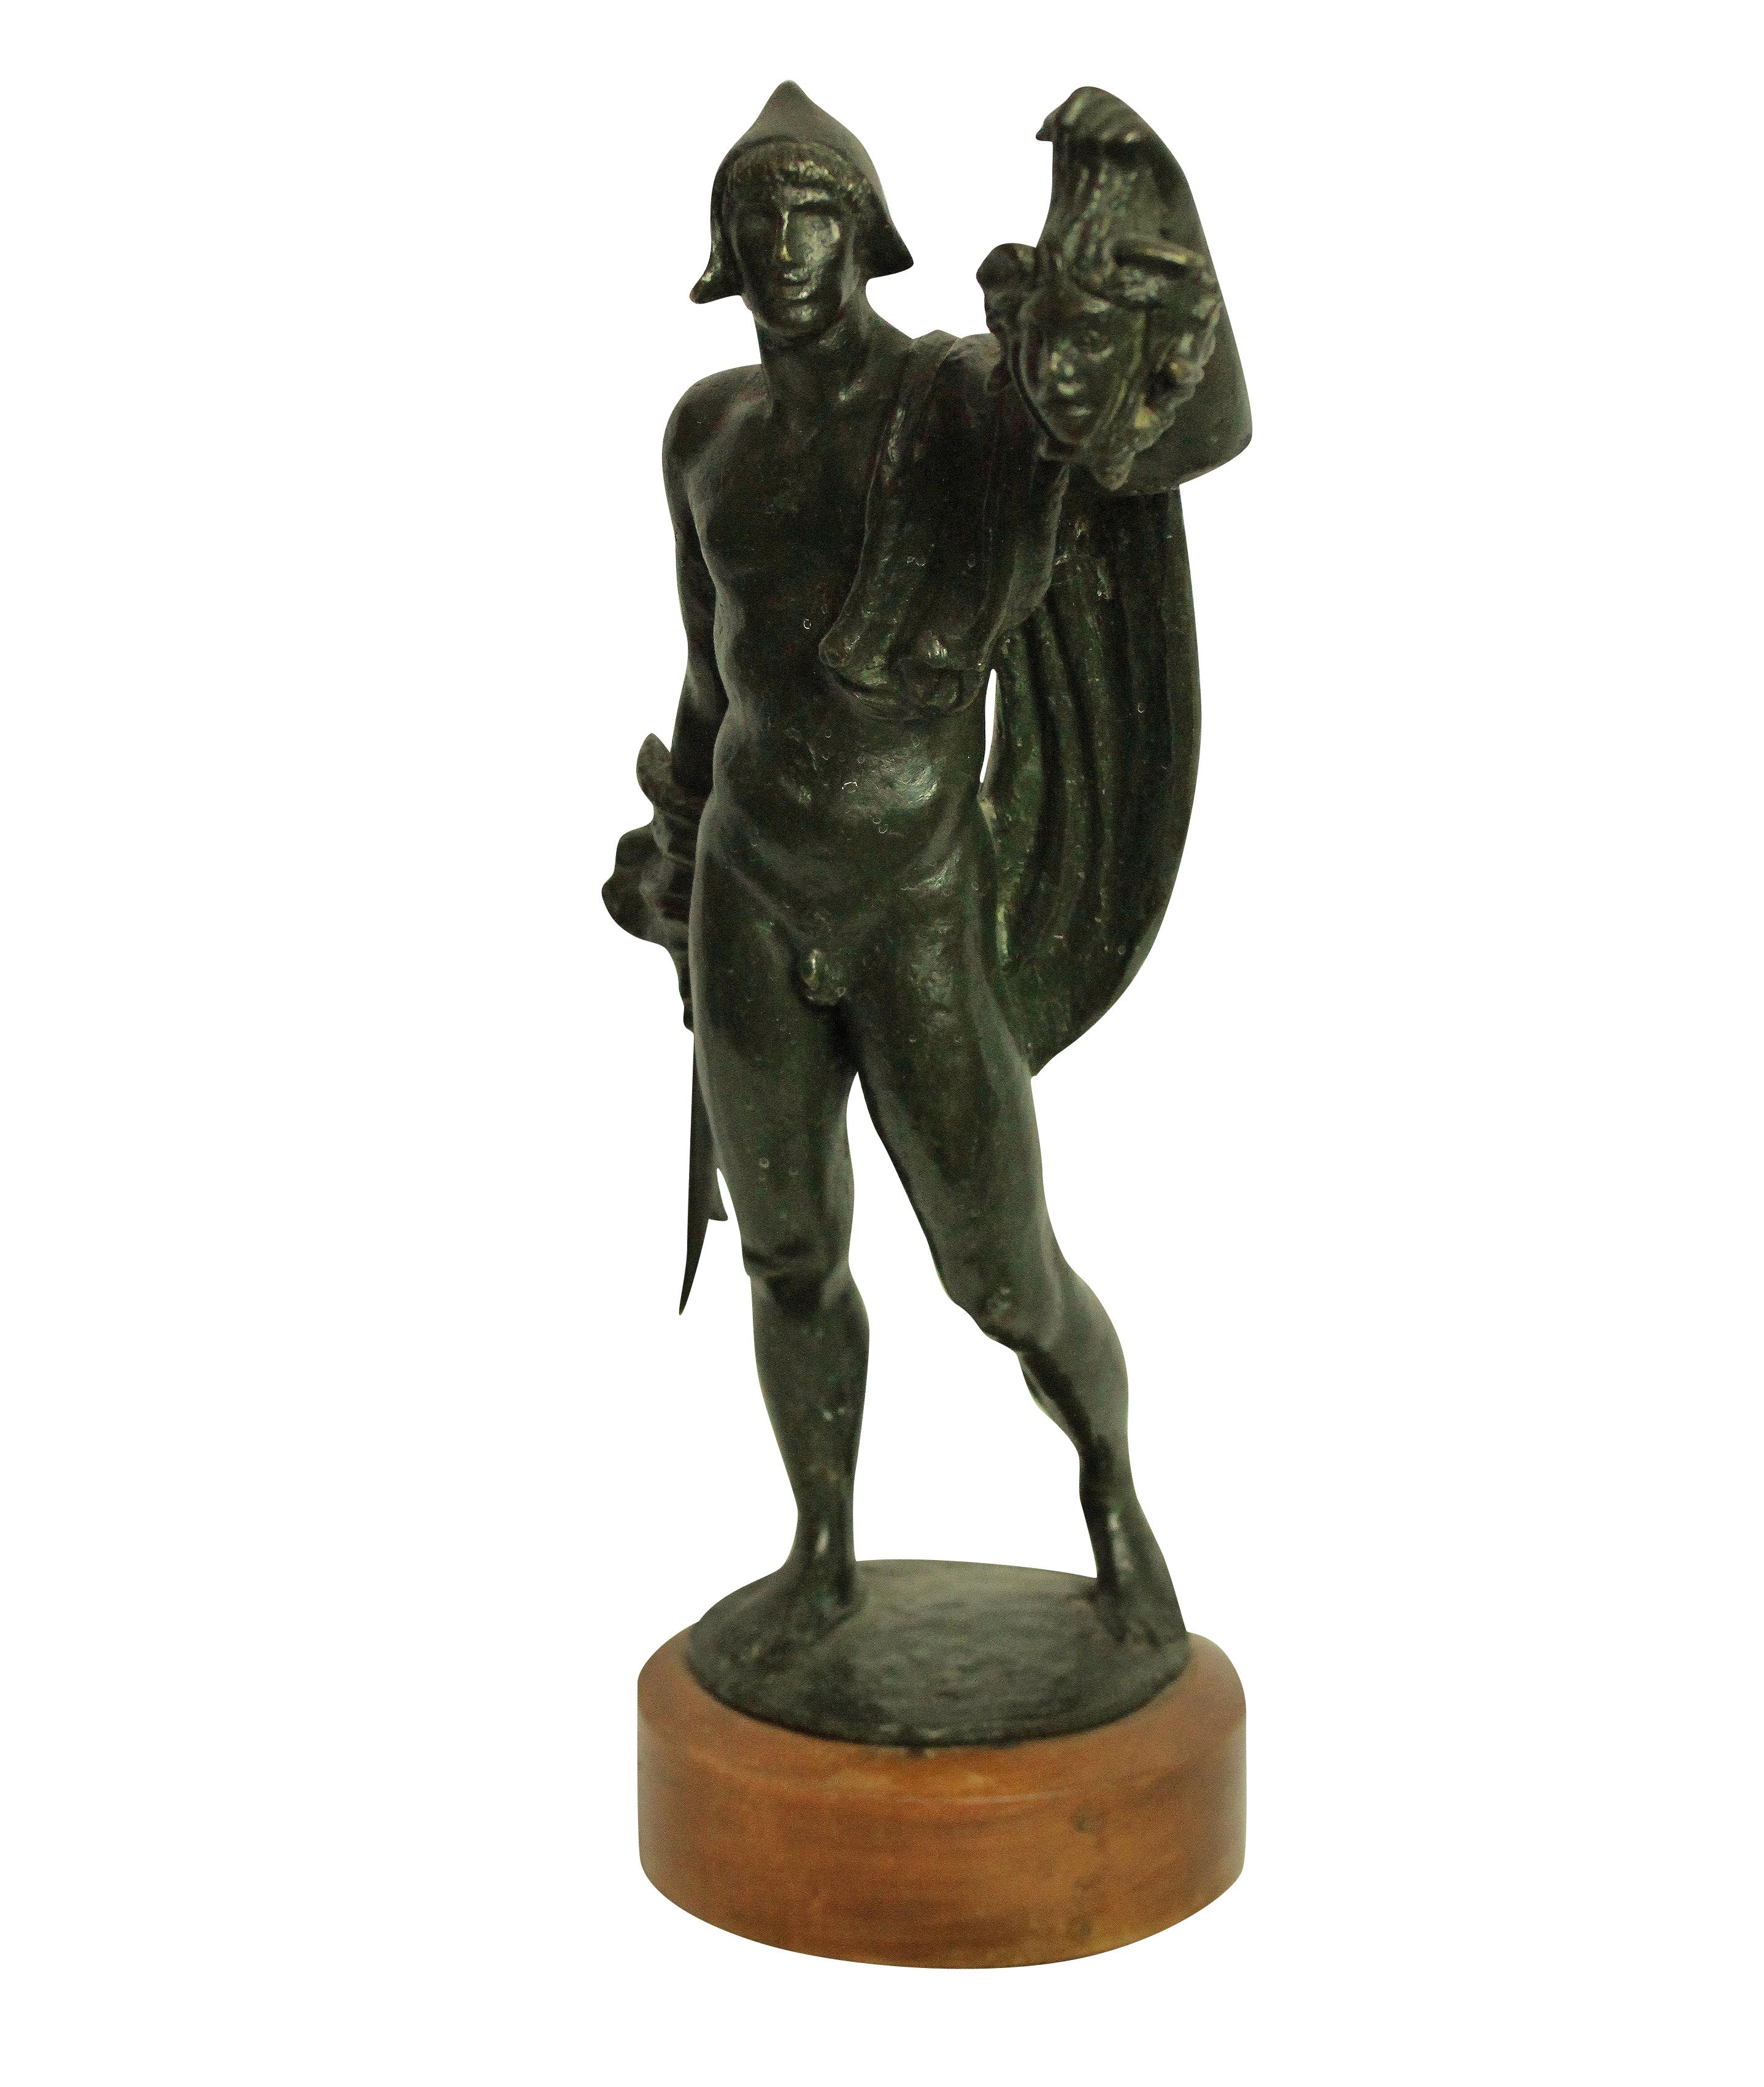 An Italian bronze statue of Perseus holding up the head of Medusa.